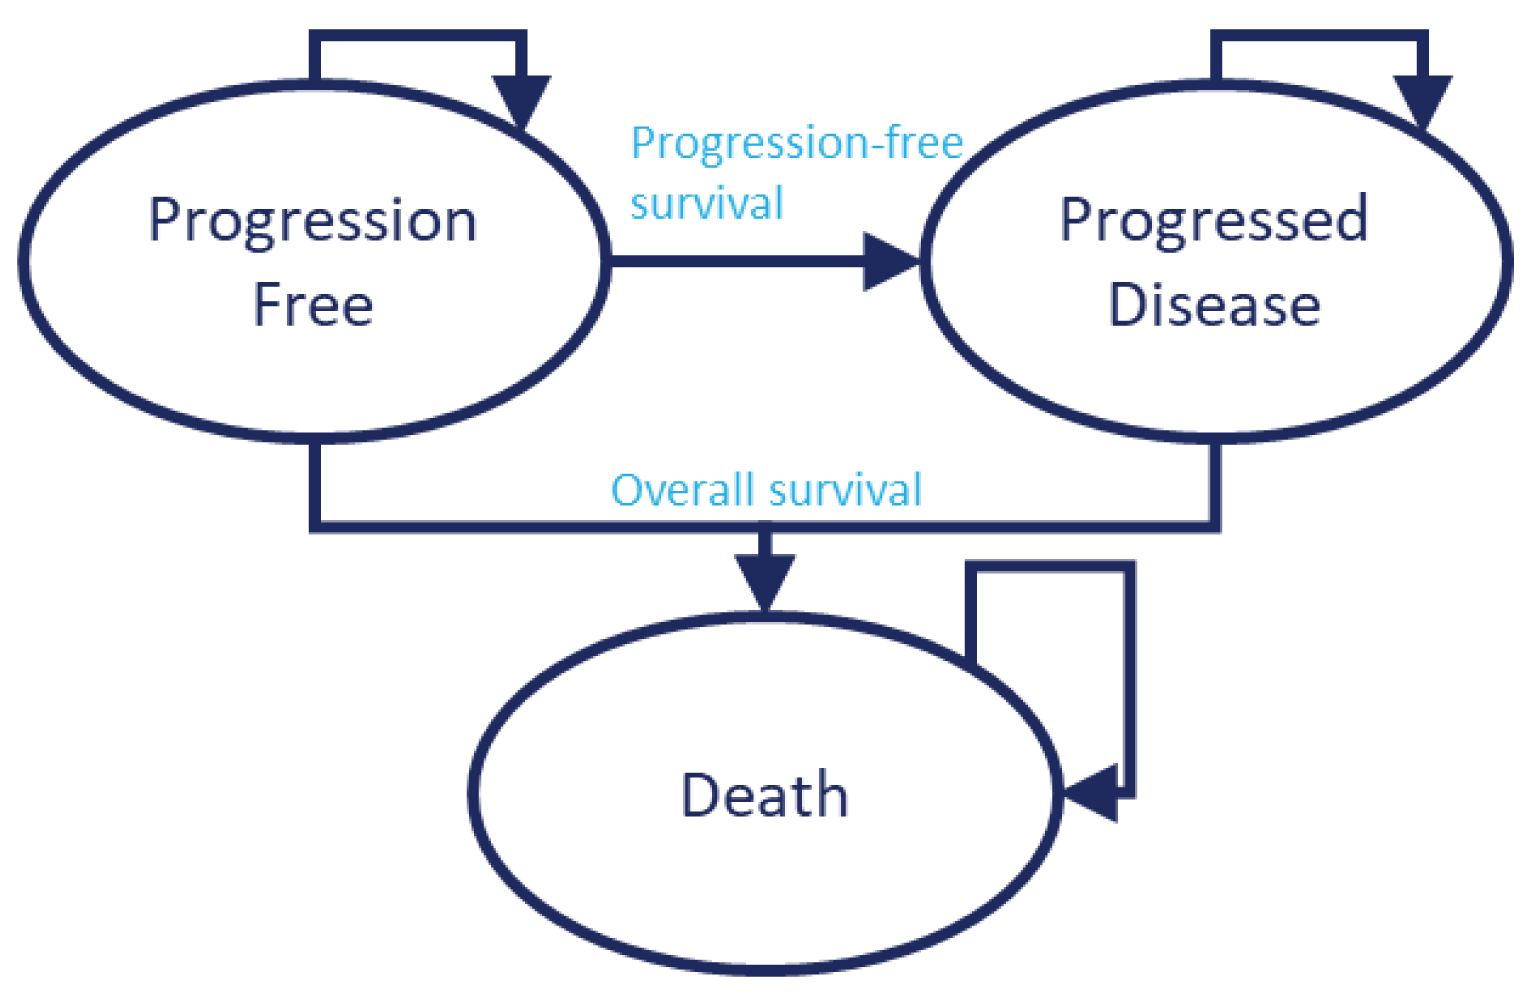 The figure depicts the sponsor’s 3 state partitioned survival model. In each cycle, patients can remain in the progression-free state, or transition to the progressed disease or death states. Patients can then remain in the progressed disease state or progress to death.